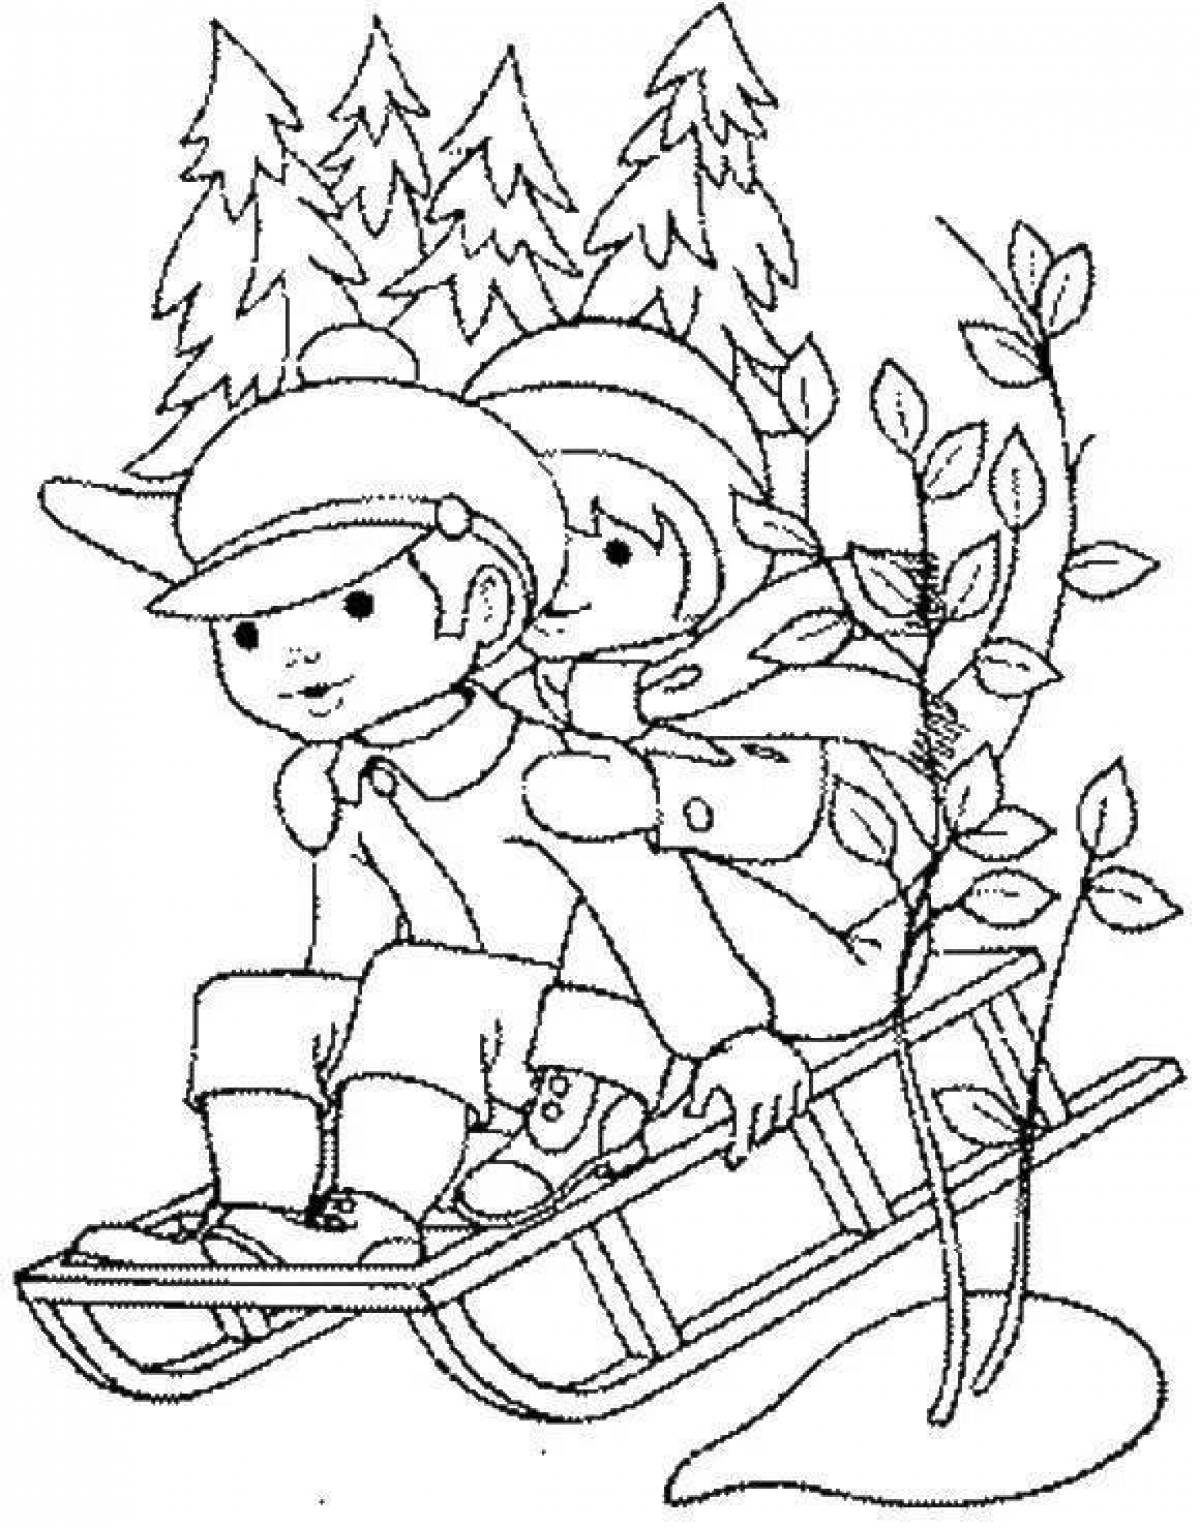 Coloring page energetic child on a sled